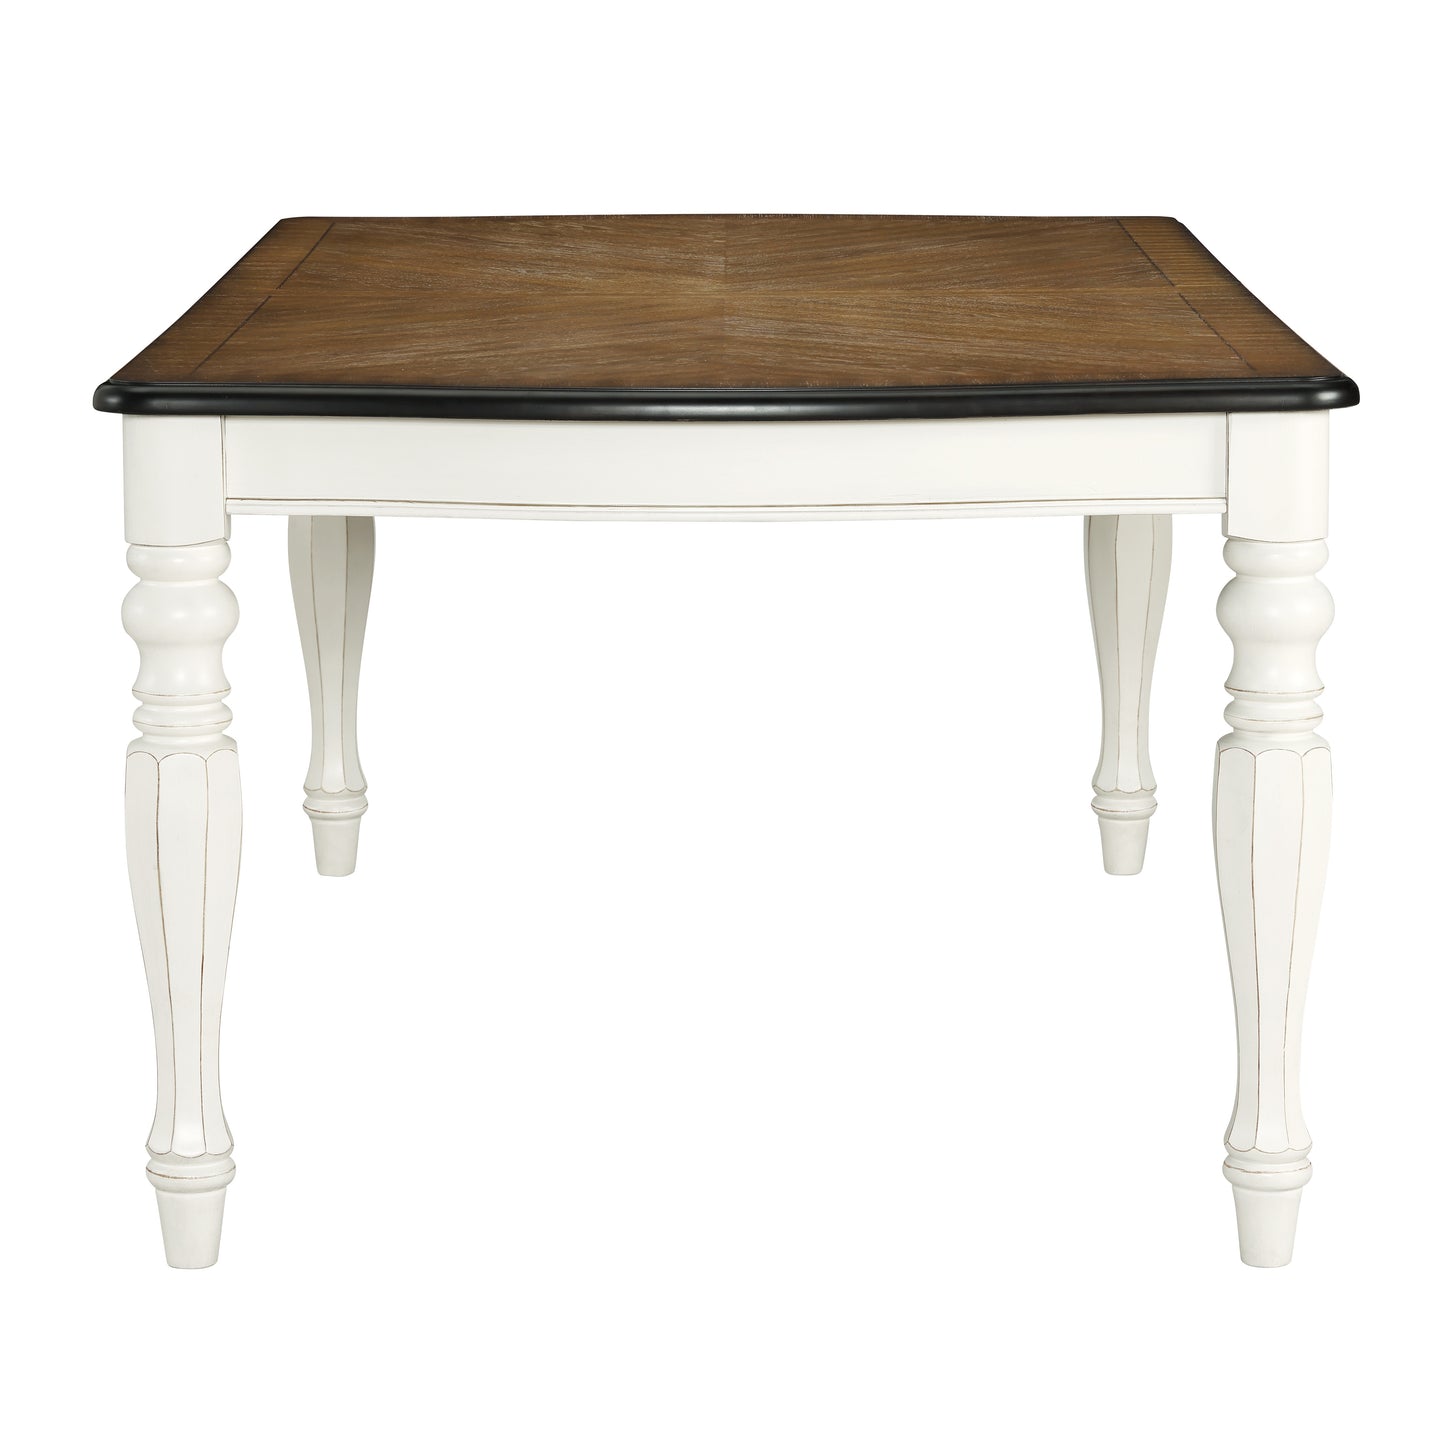 Roundhill Furniture Belleza French Country Dining Table, Antique White and Weathered Oak Finish